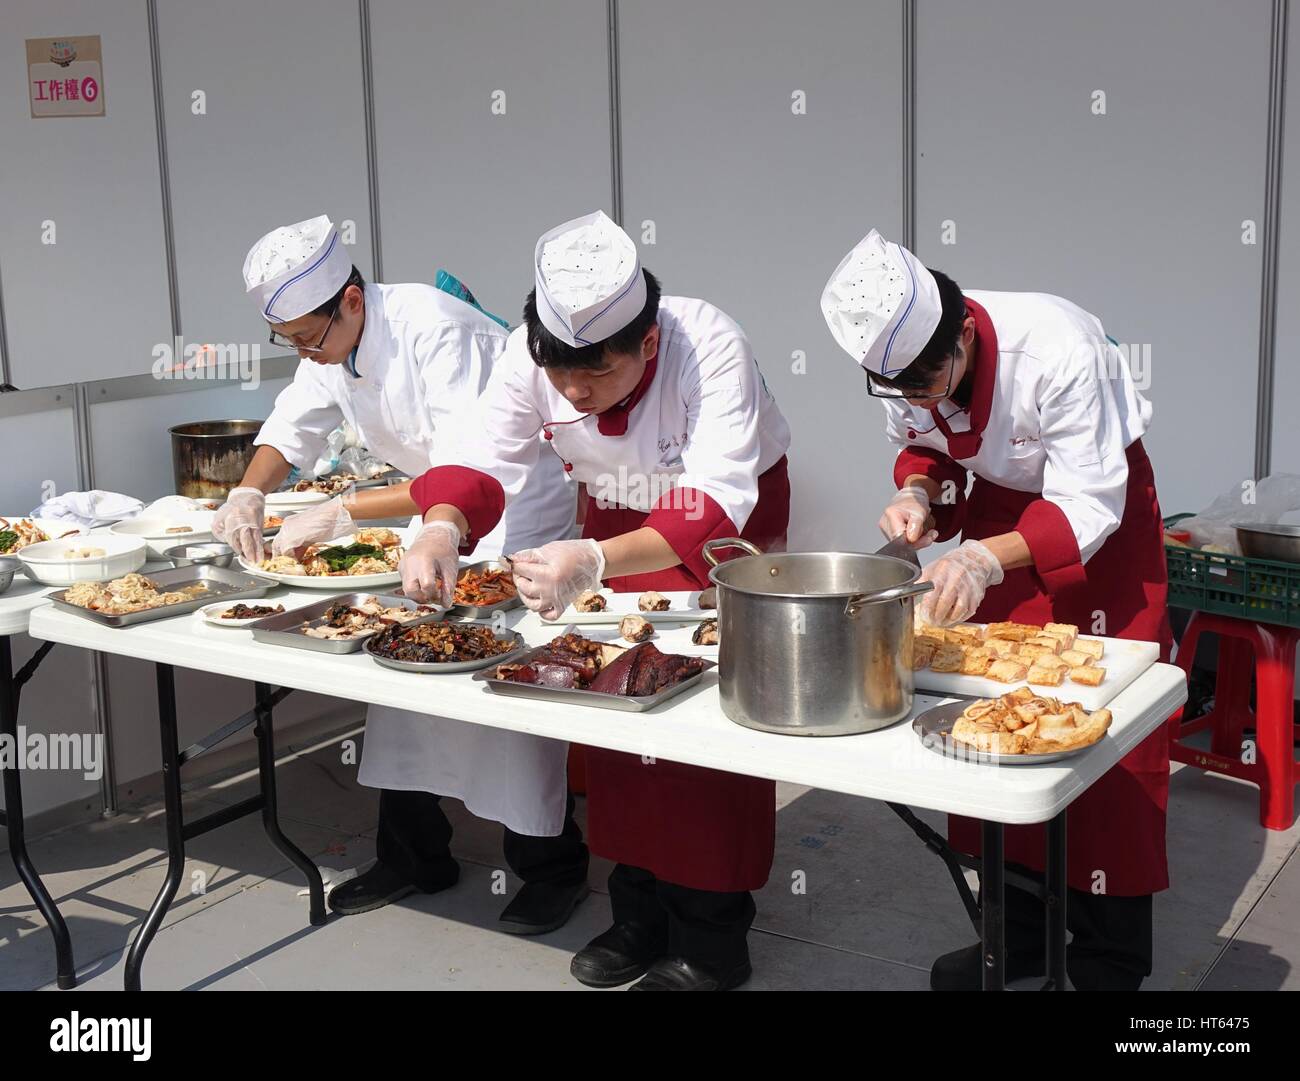 KAOHSIUNG, TAIWAN -- NOVEMBER 28, 2015: Three chefs prepare dishes for the cooking competition during the 2015 Hakka Food Festival, which is a yearly  Stock Photo